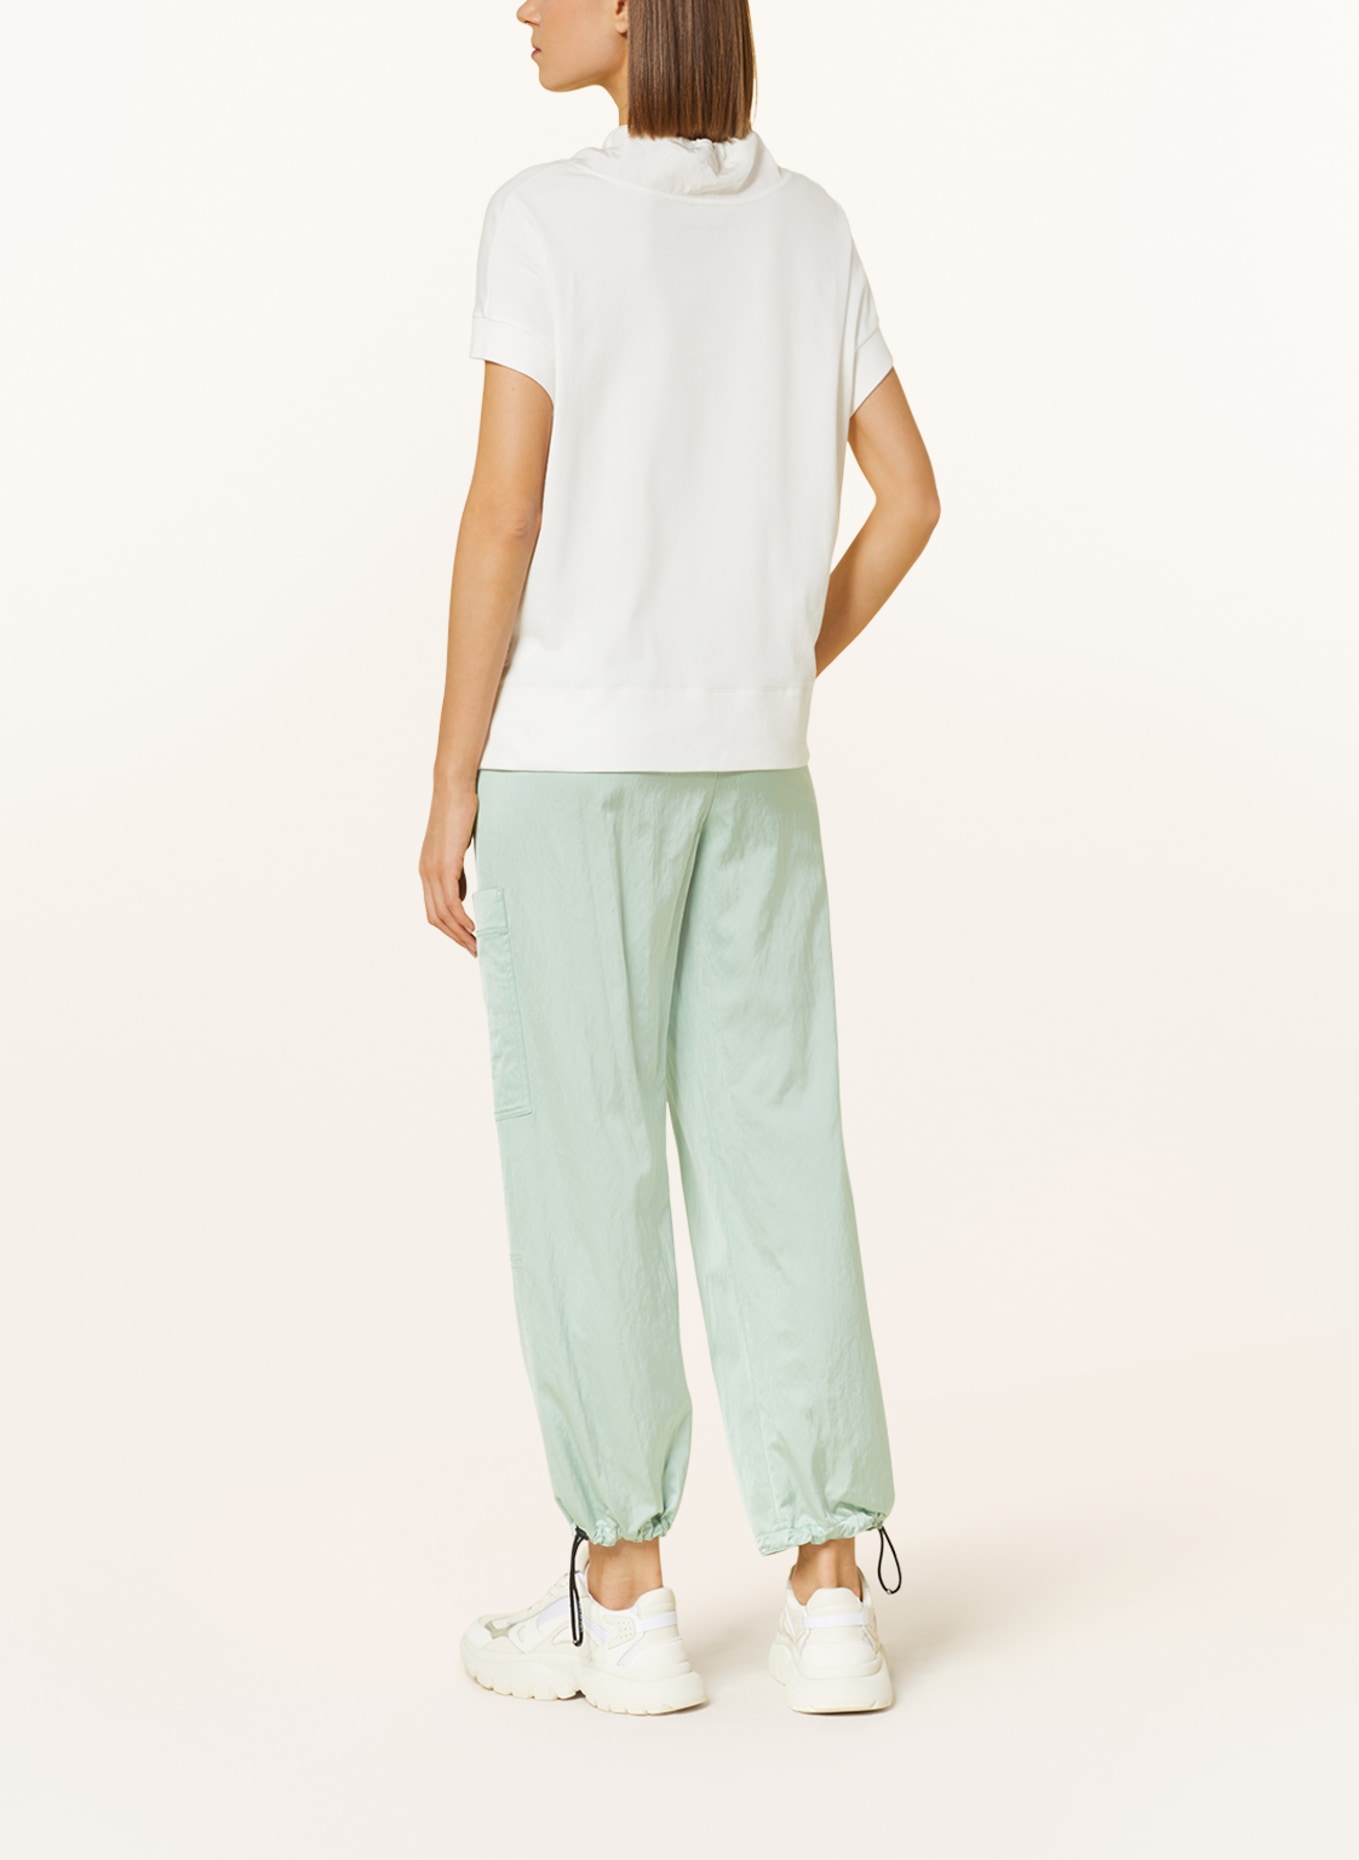 MARC CAIN T-shirt in mixed materials, Color: 110 off (Image 3)